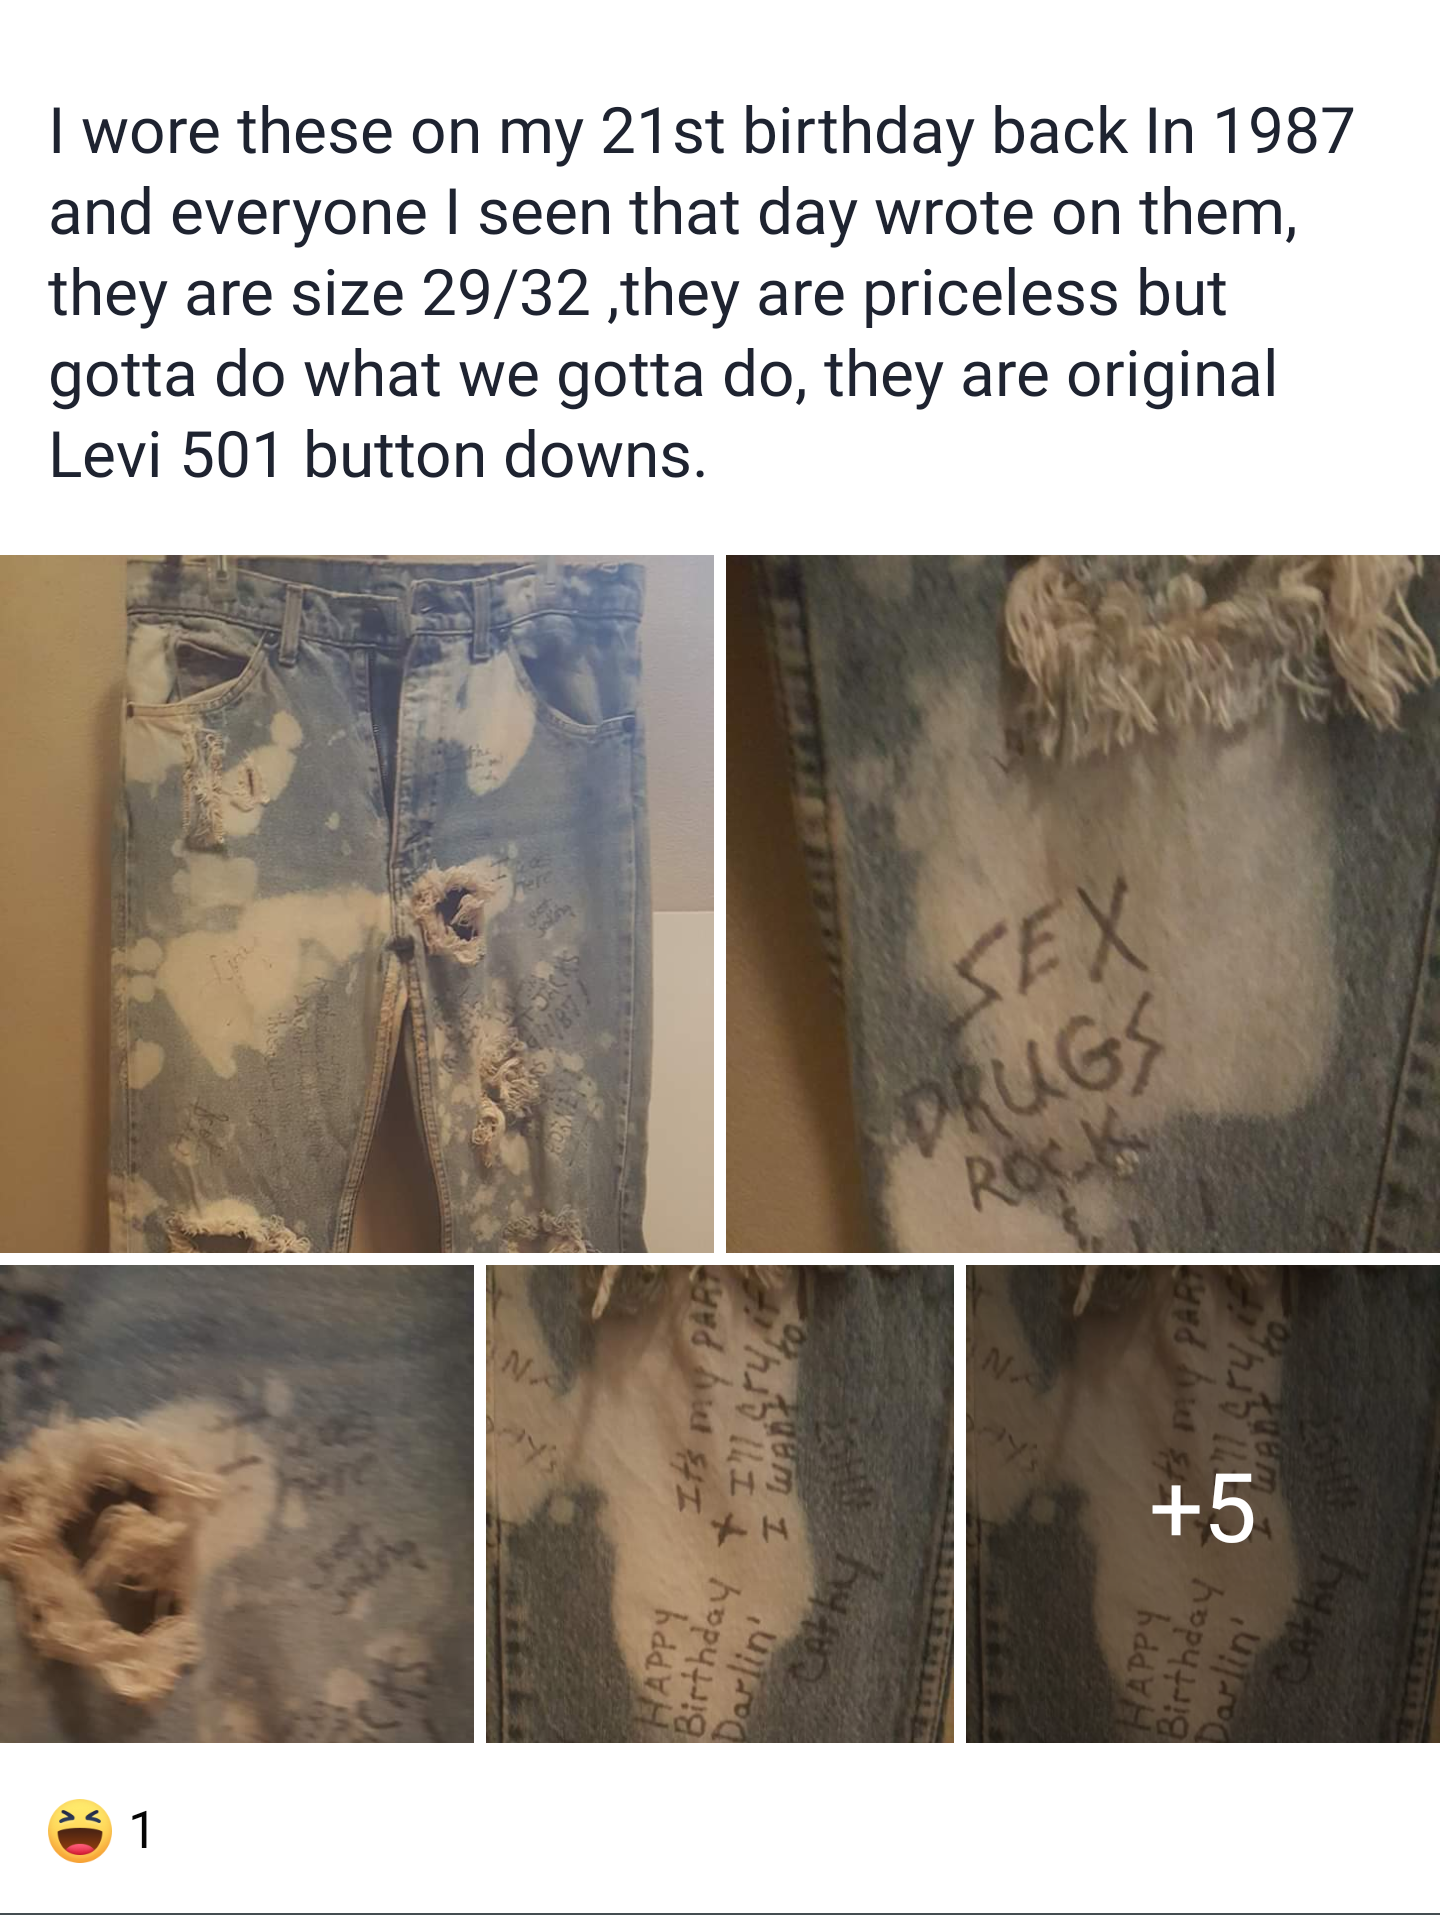 human - I wore these on my 21st birthday back in 1987 and everyone I seen that day wrote on them, they are size 2932 ,they are priceless but gotta do what we gotta do, they are original Levi 501 button downs.